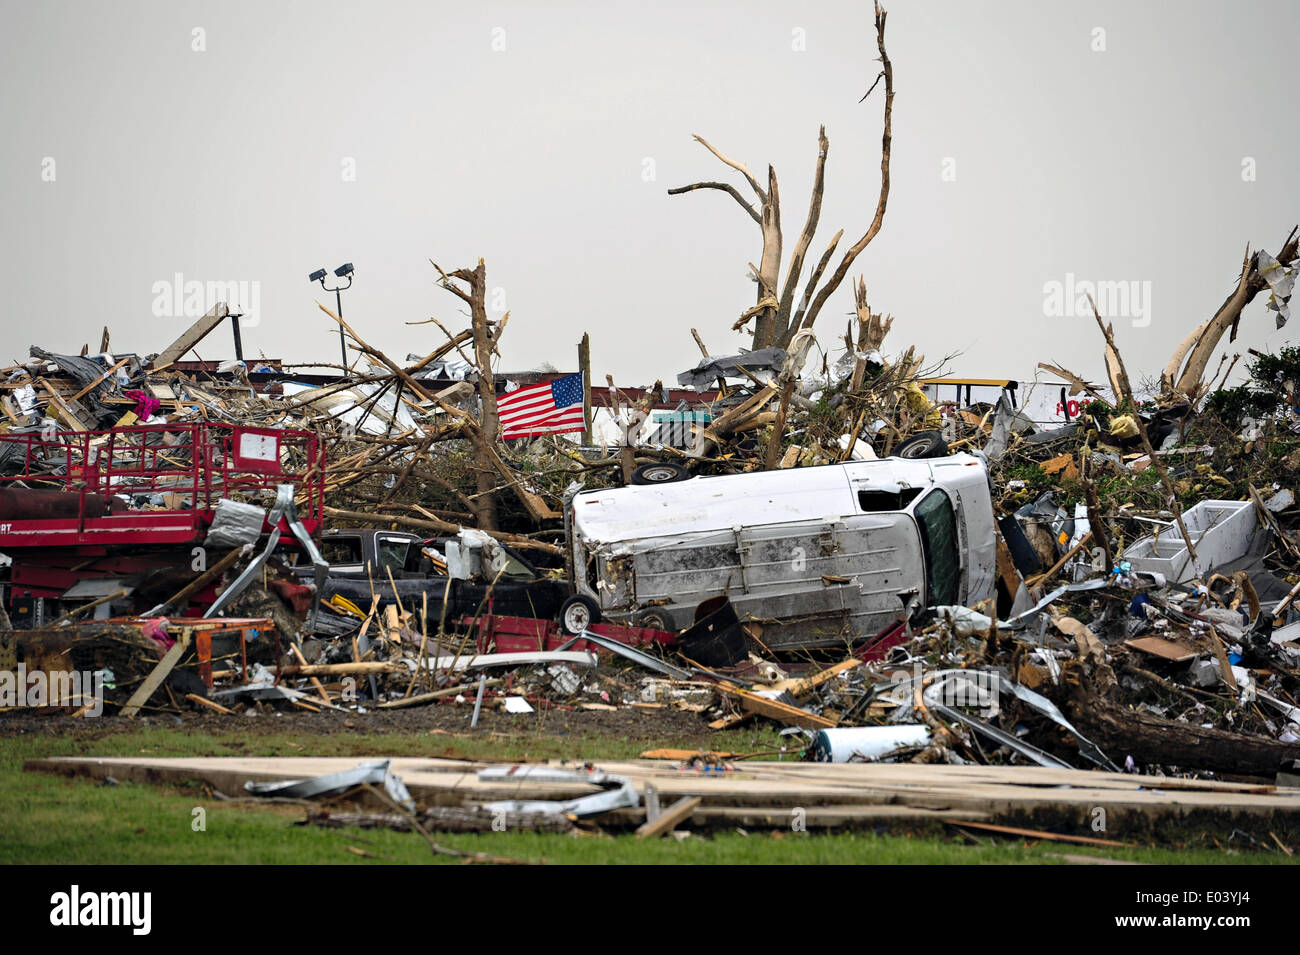 Aftermath of a massive tornado that swept swept across the southern states killing 35 people April 28, 2014 in Vilonia, Arkansas. Stock Photo